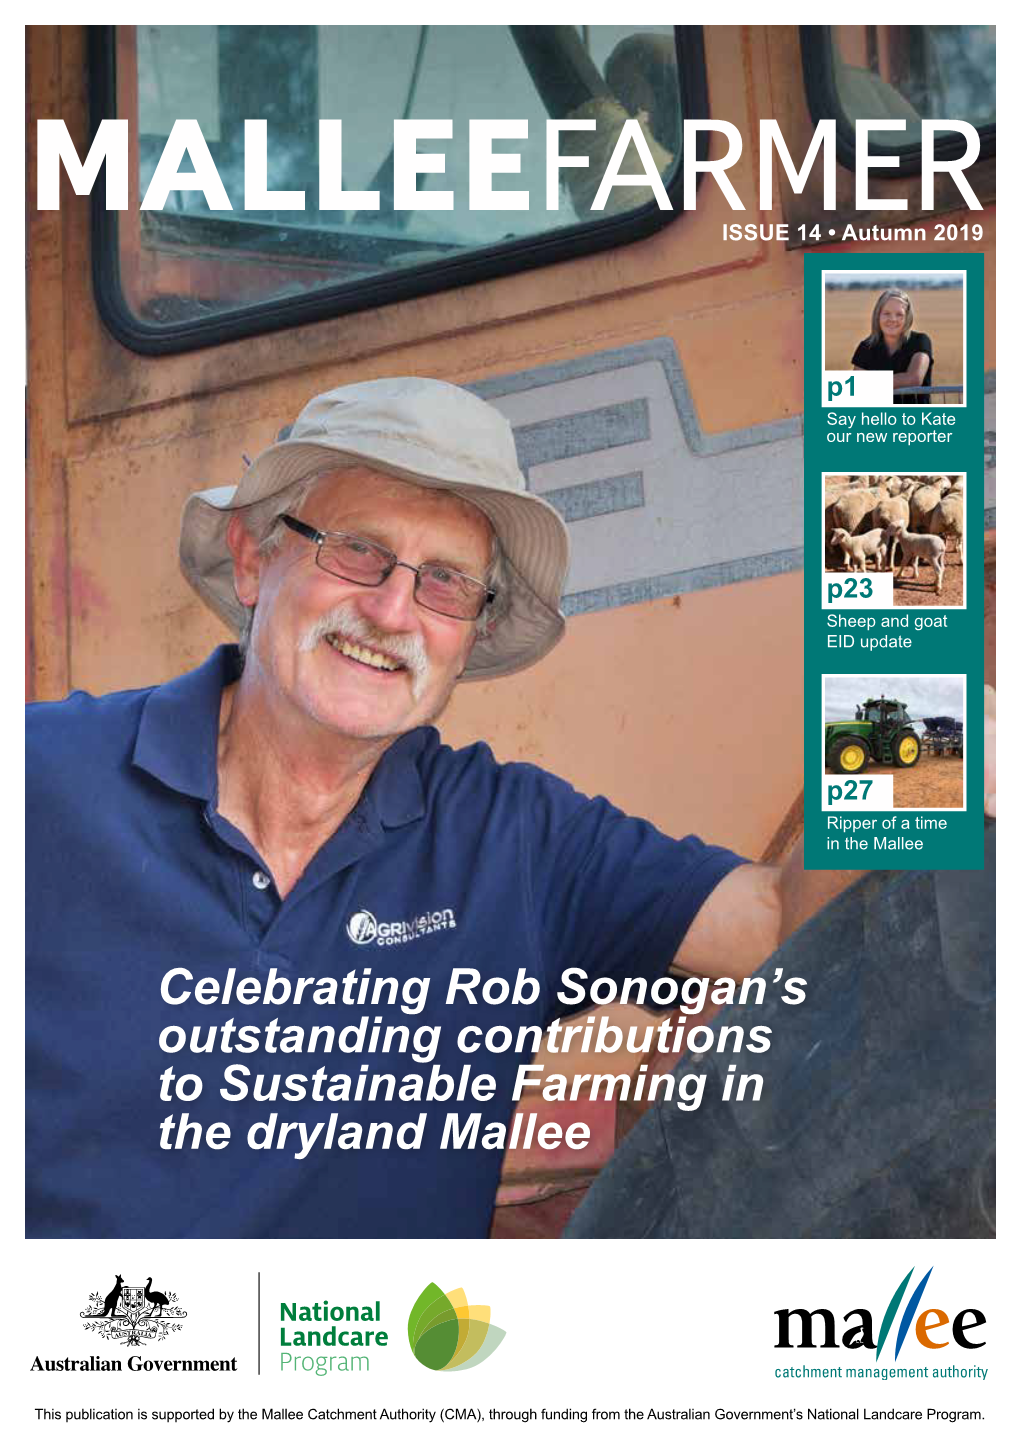 Celebrating Rob Sonogan's Outstanding Contributions To